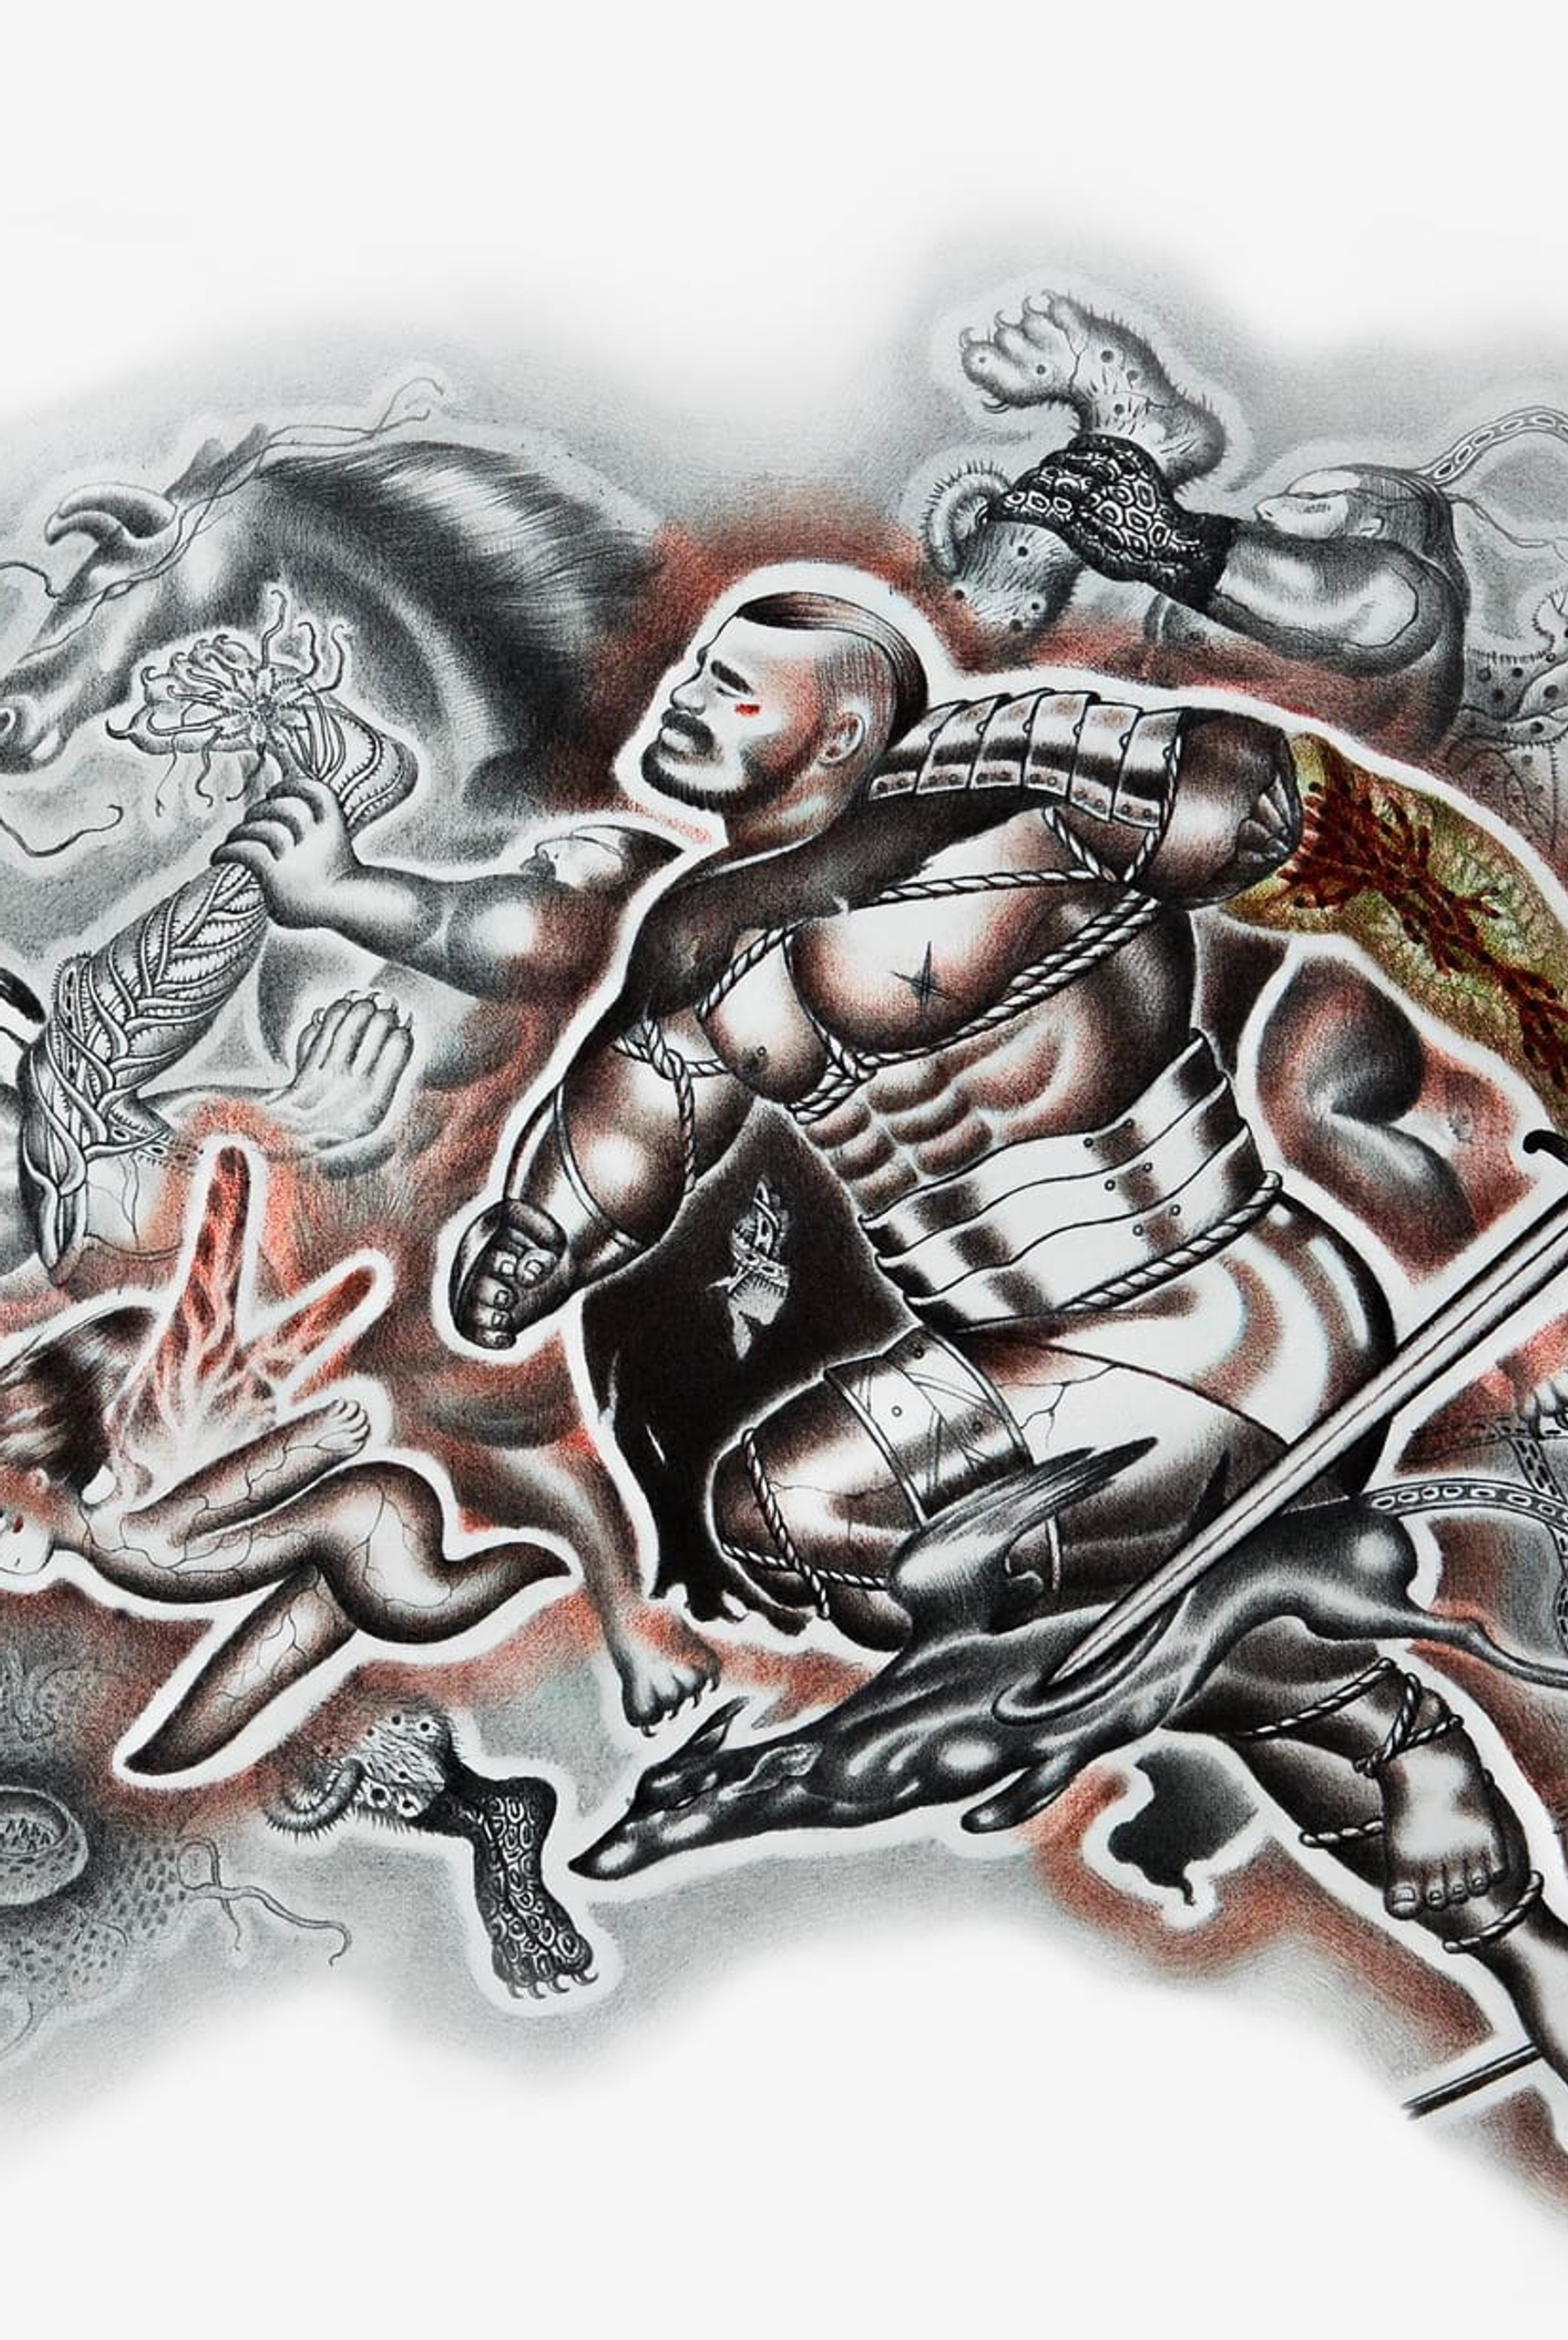 An image by Hao Zhang, of drawn figures in movement, in tones of black, white and bronze, including a horse, winged creatures and a bearded man wearing armour, a cape and carrying a sword.